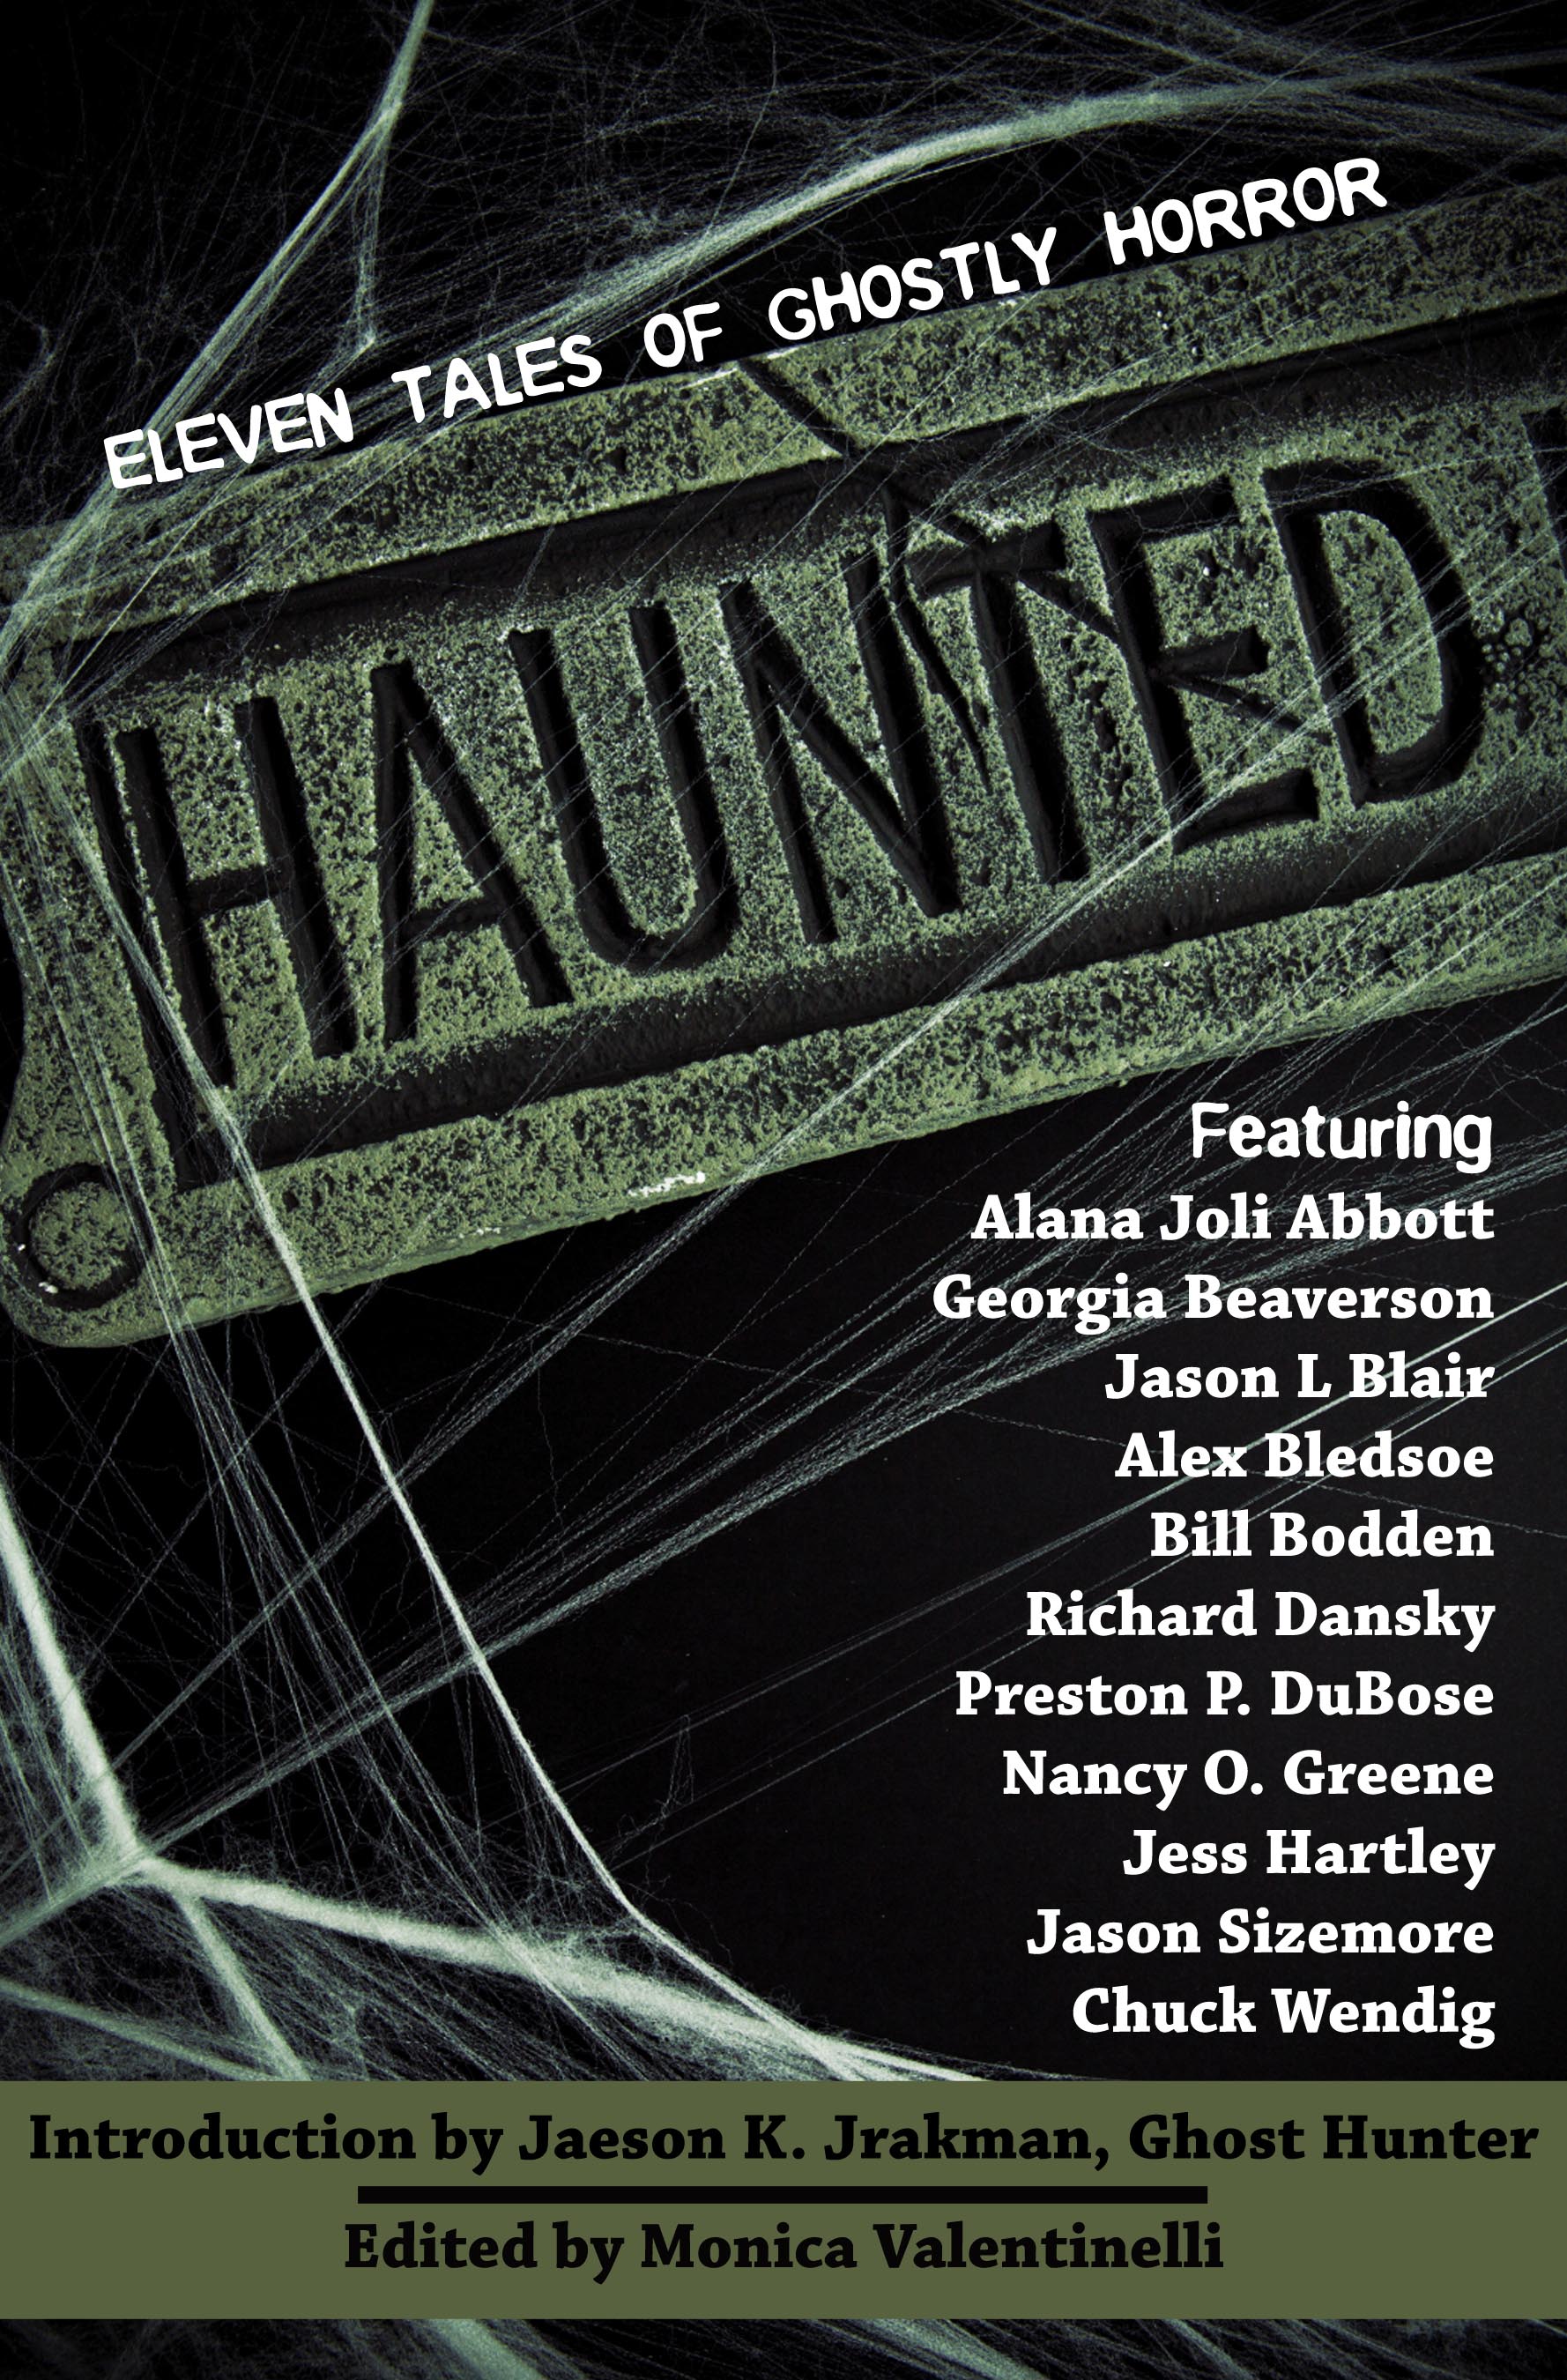 Haunted Cover